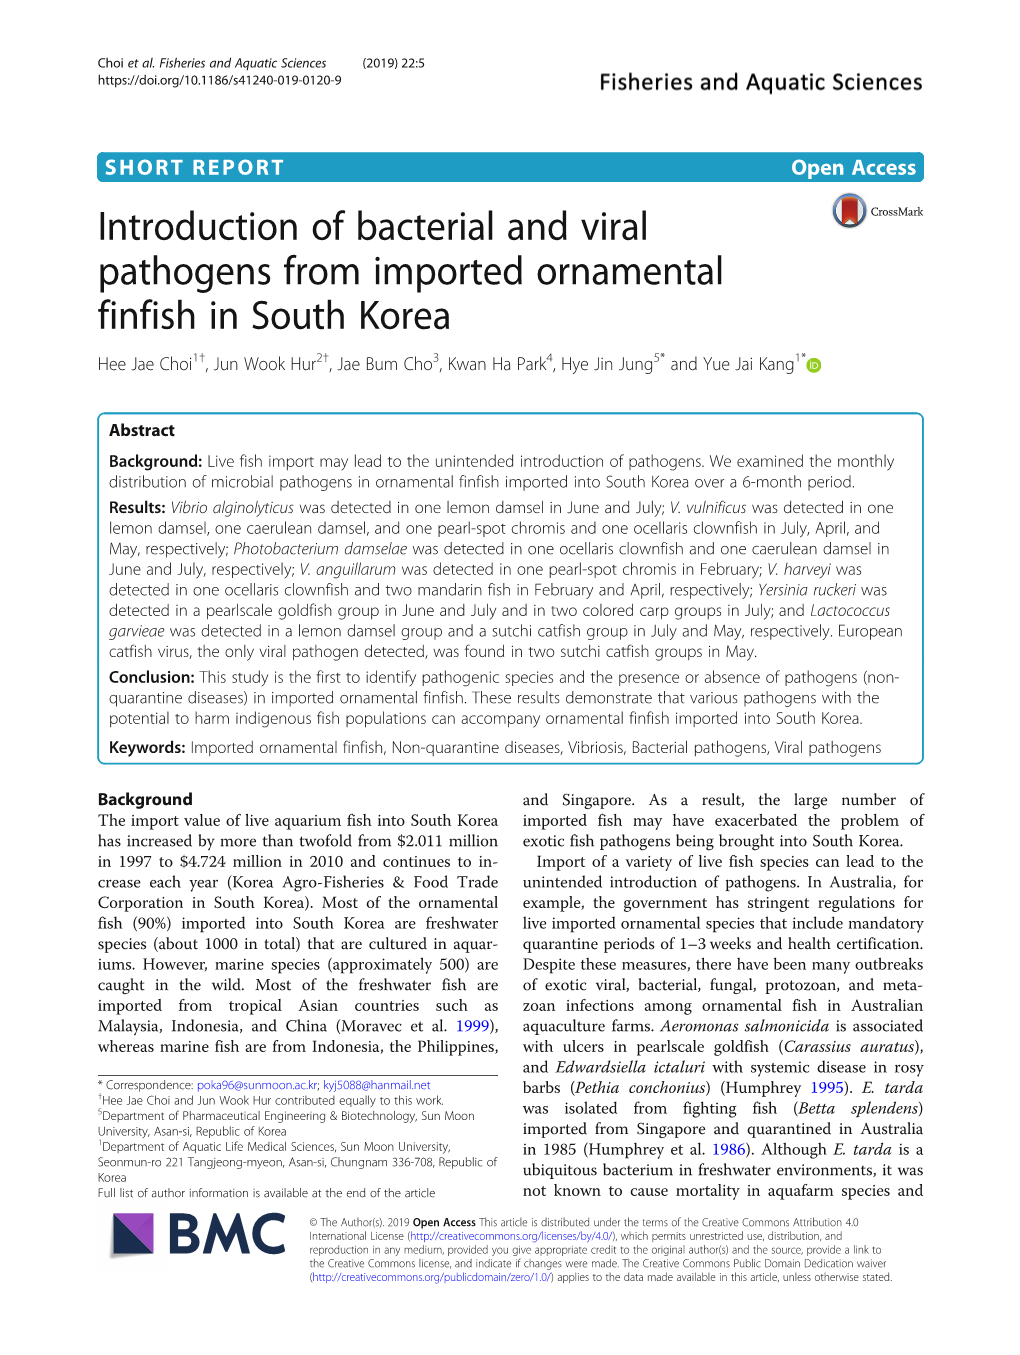 View of Extracellular Virulence Increase in Imported Pathogens in South Korea